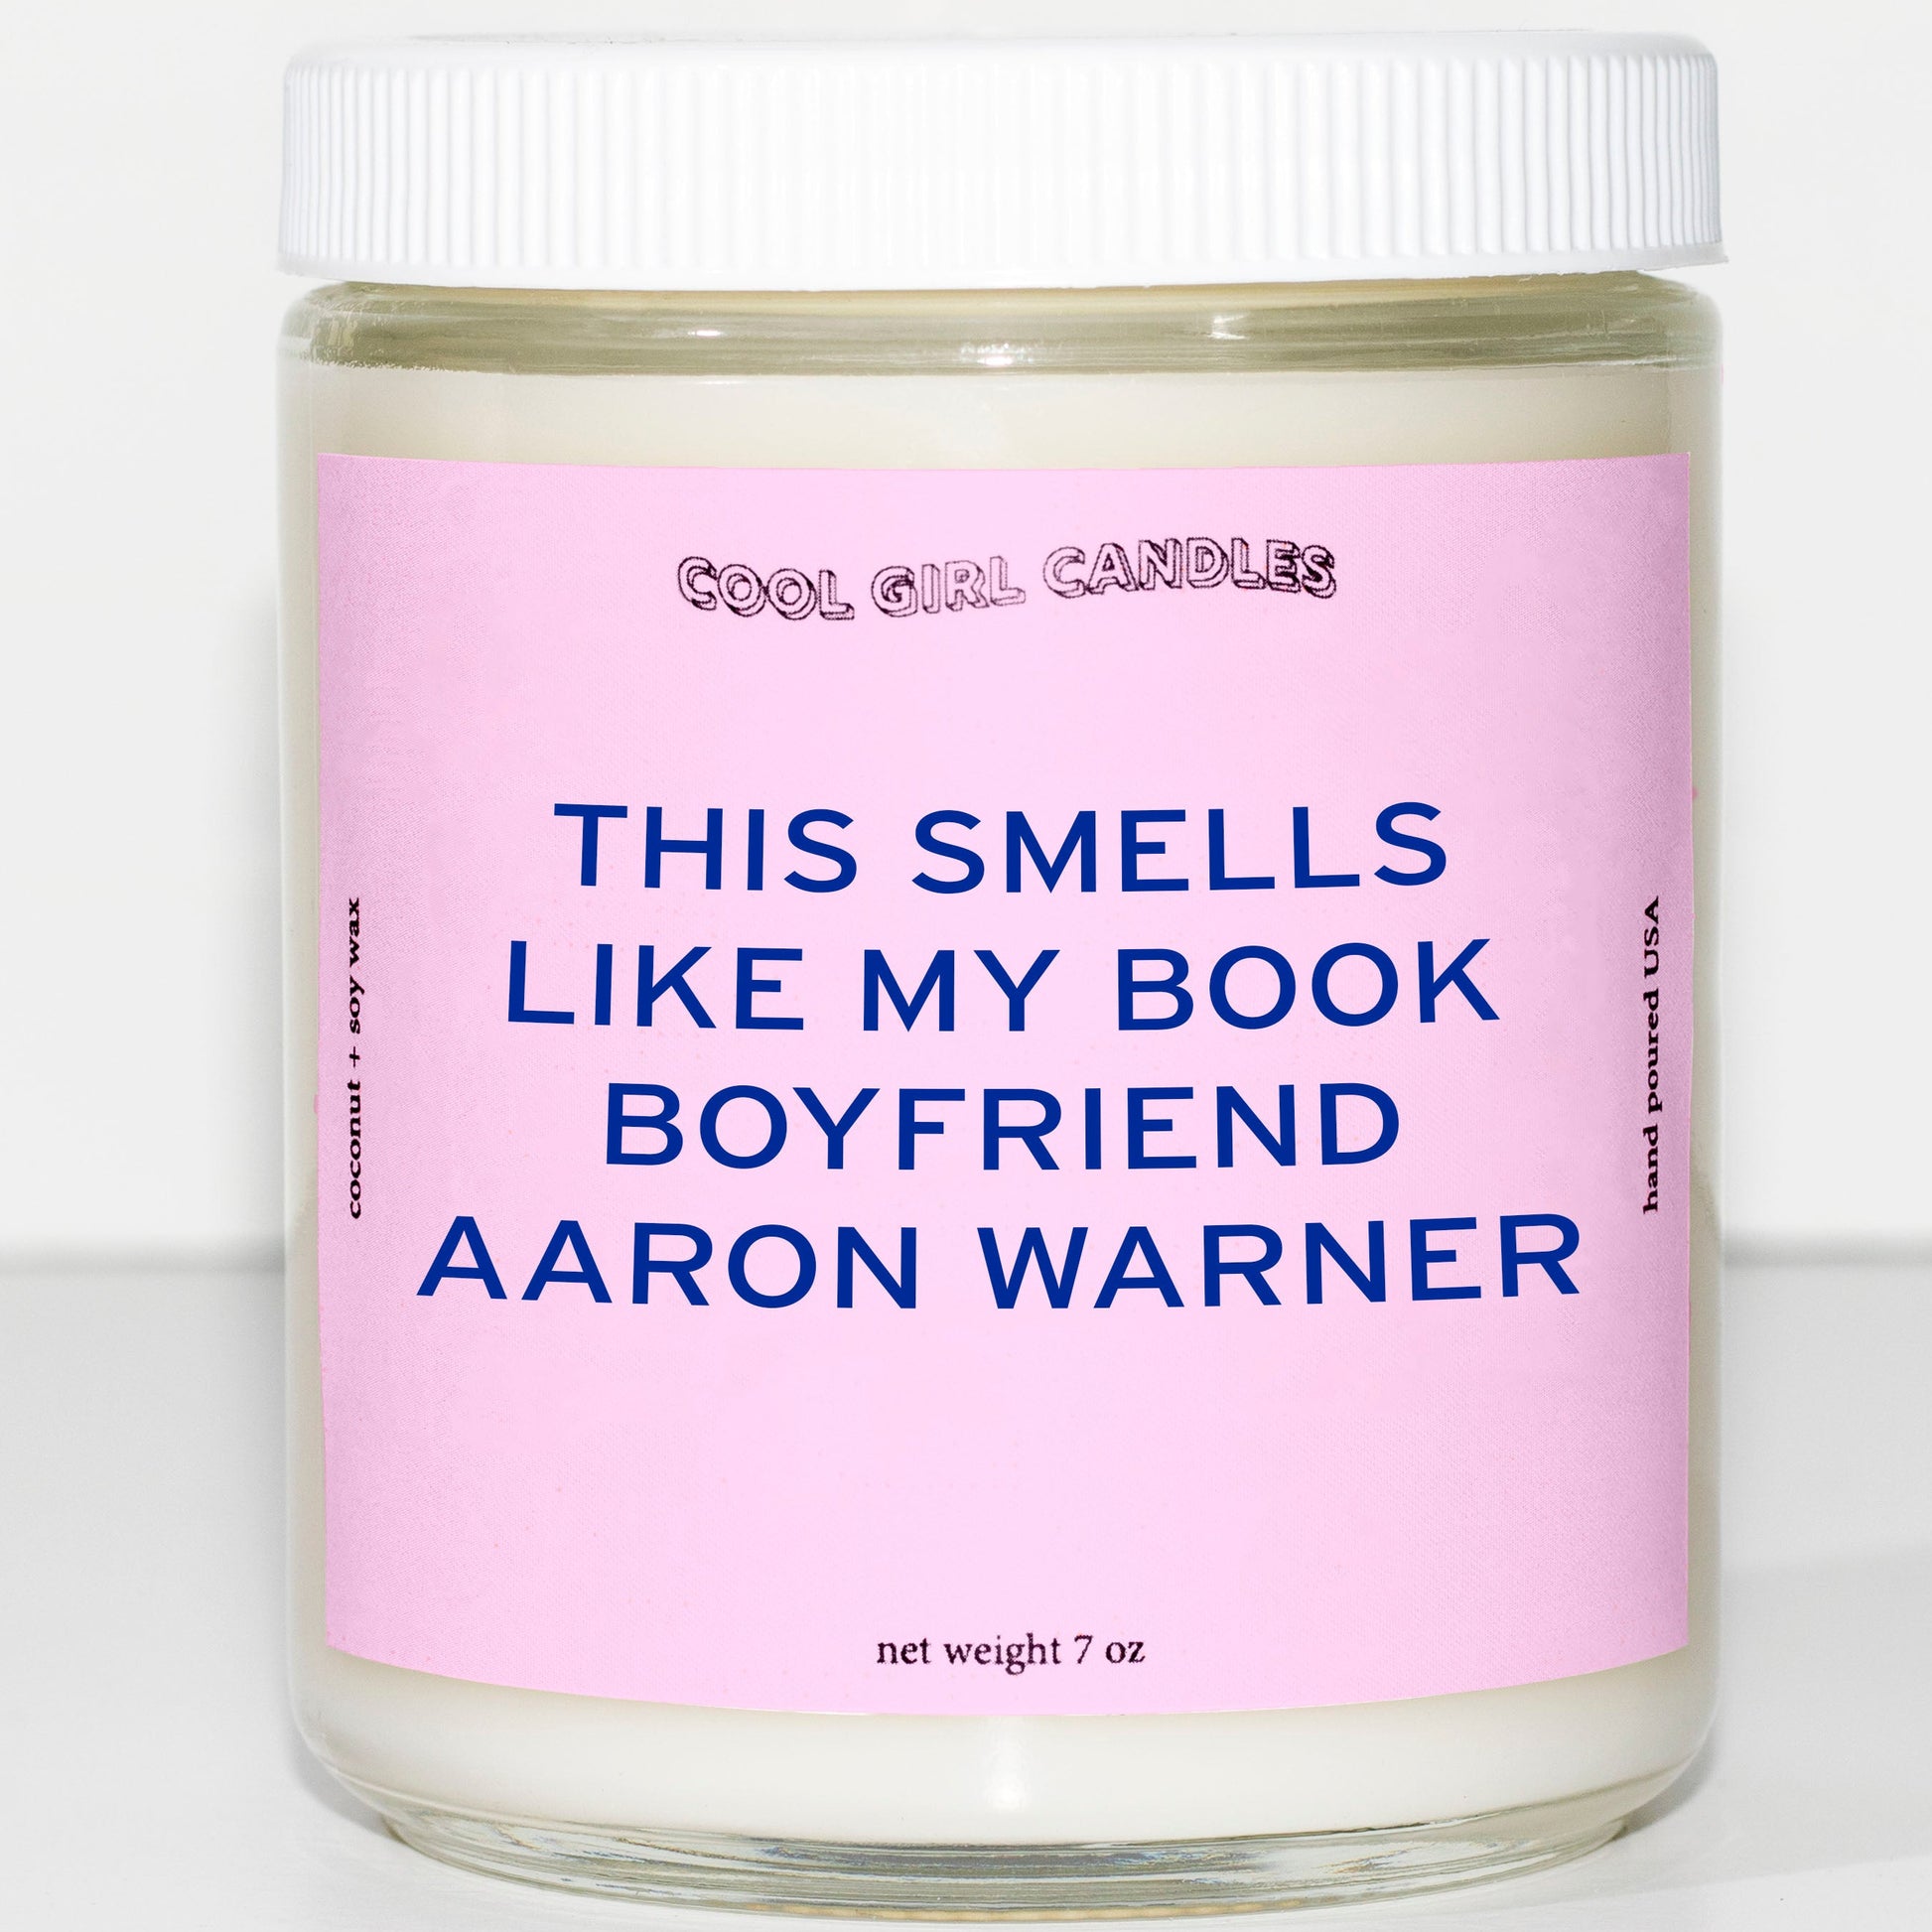 cool girl candles this smells like my book boyfriend aaron warner candle the shatter me book series fan gift bookish candle gift for book nerd